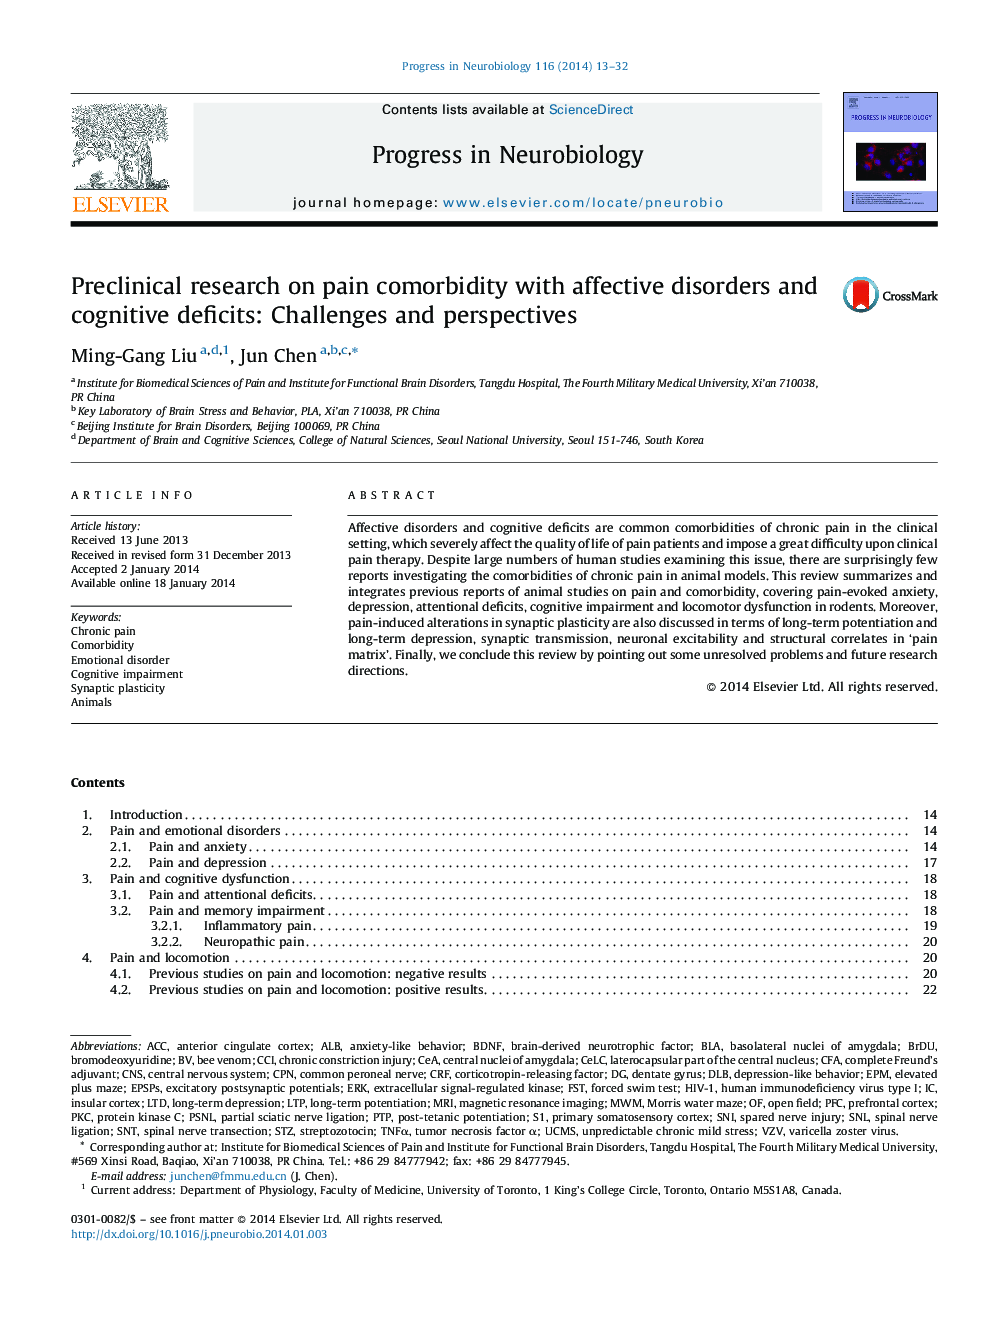 Preclinical research on pain comorbidity with affective disorders and cognitive deficits: Challenges and perspectives